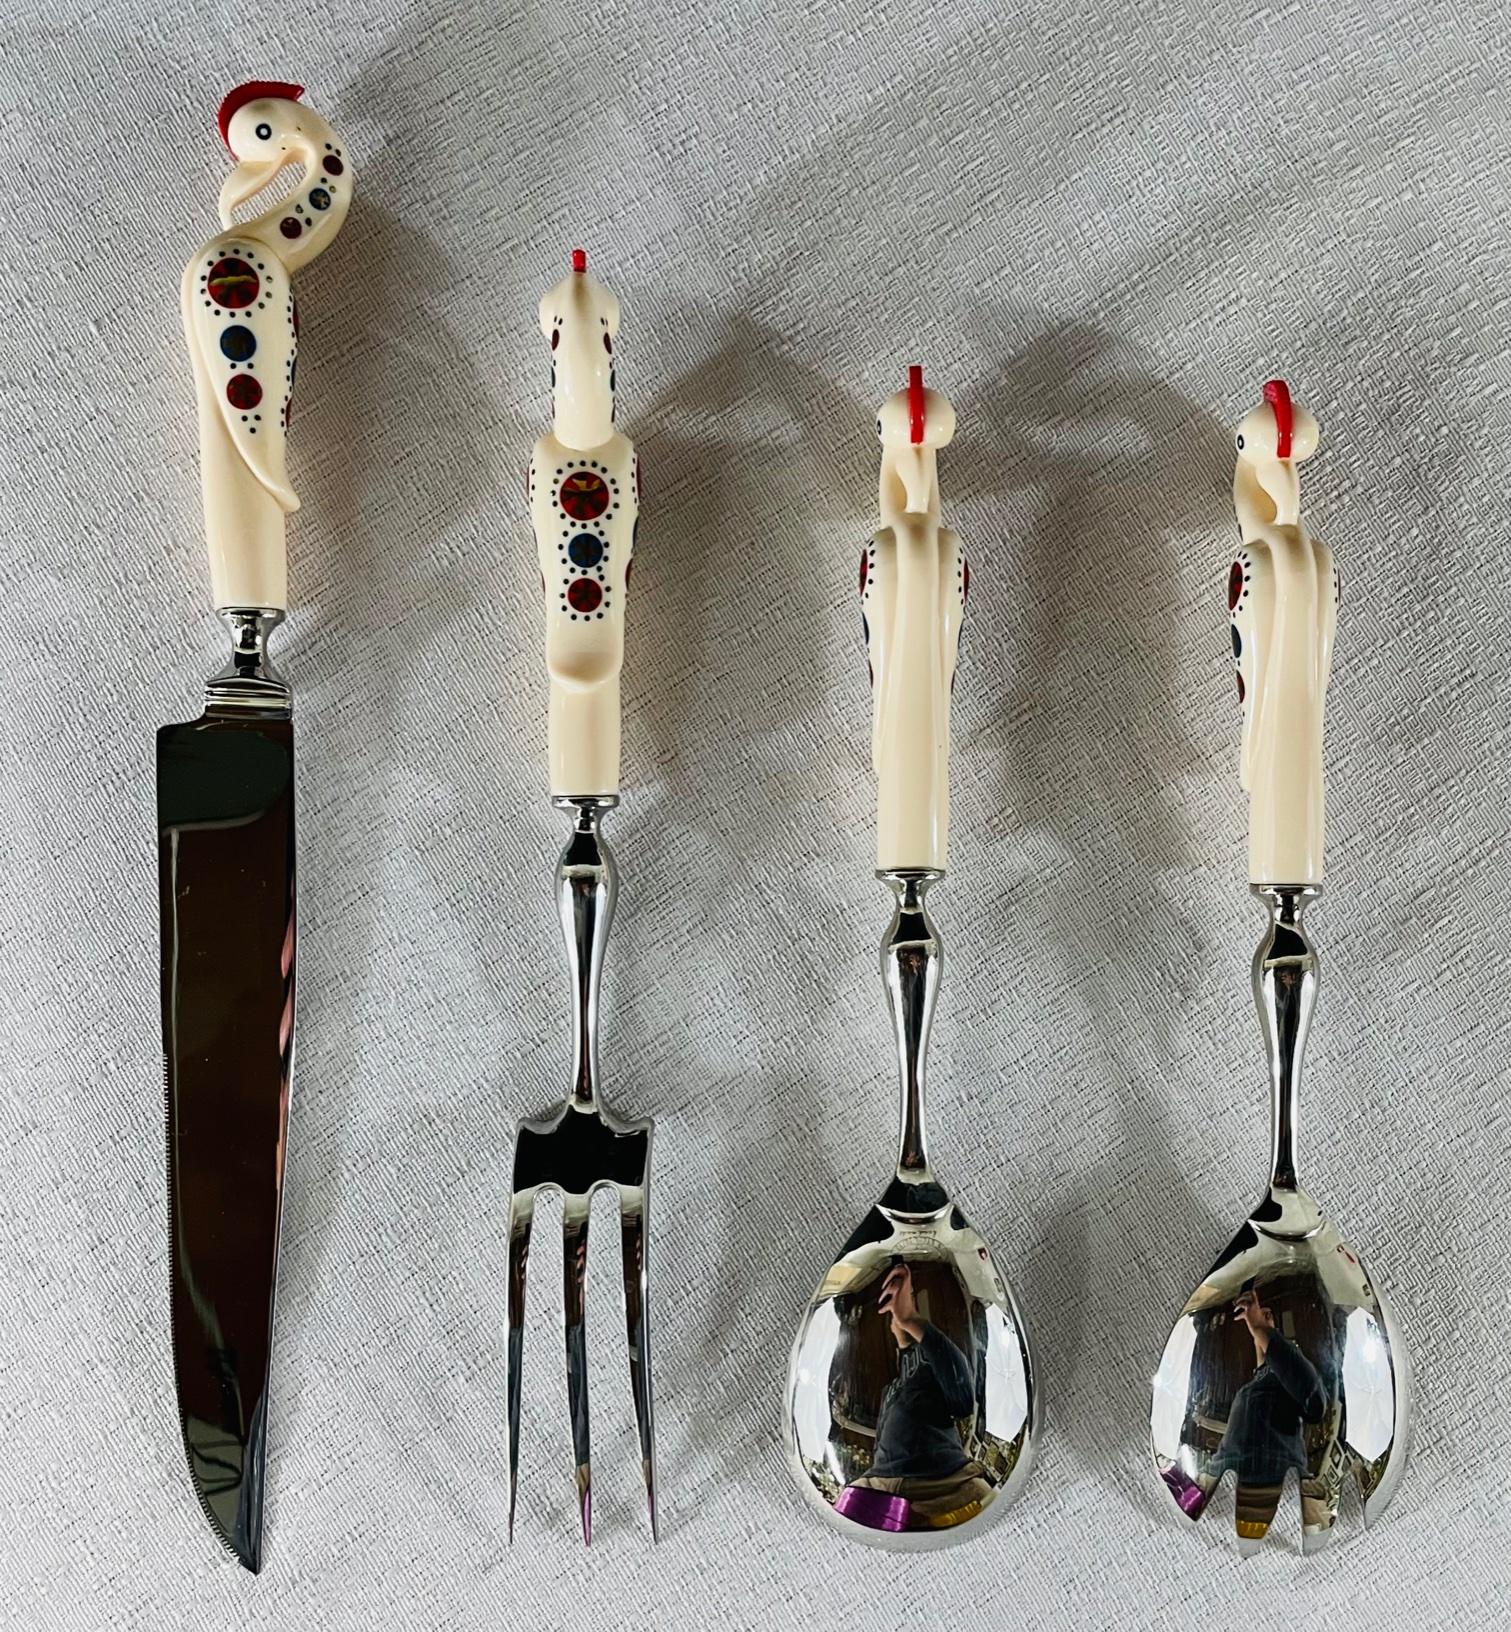 Vintage S & S Haddad Jezzine Traditional Cutlery or Carving Serving Set of 4 pcs 3